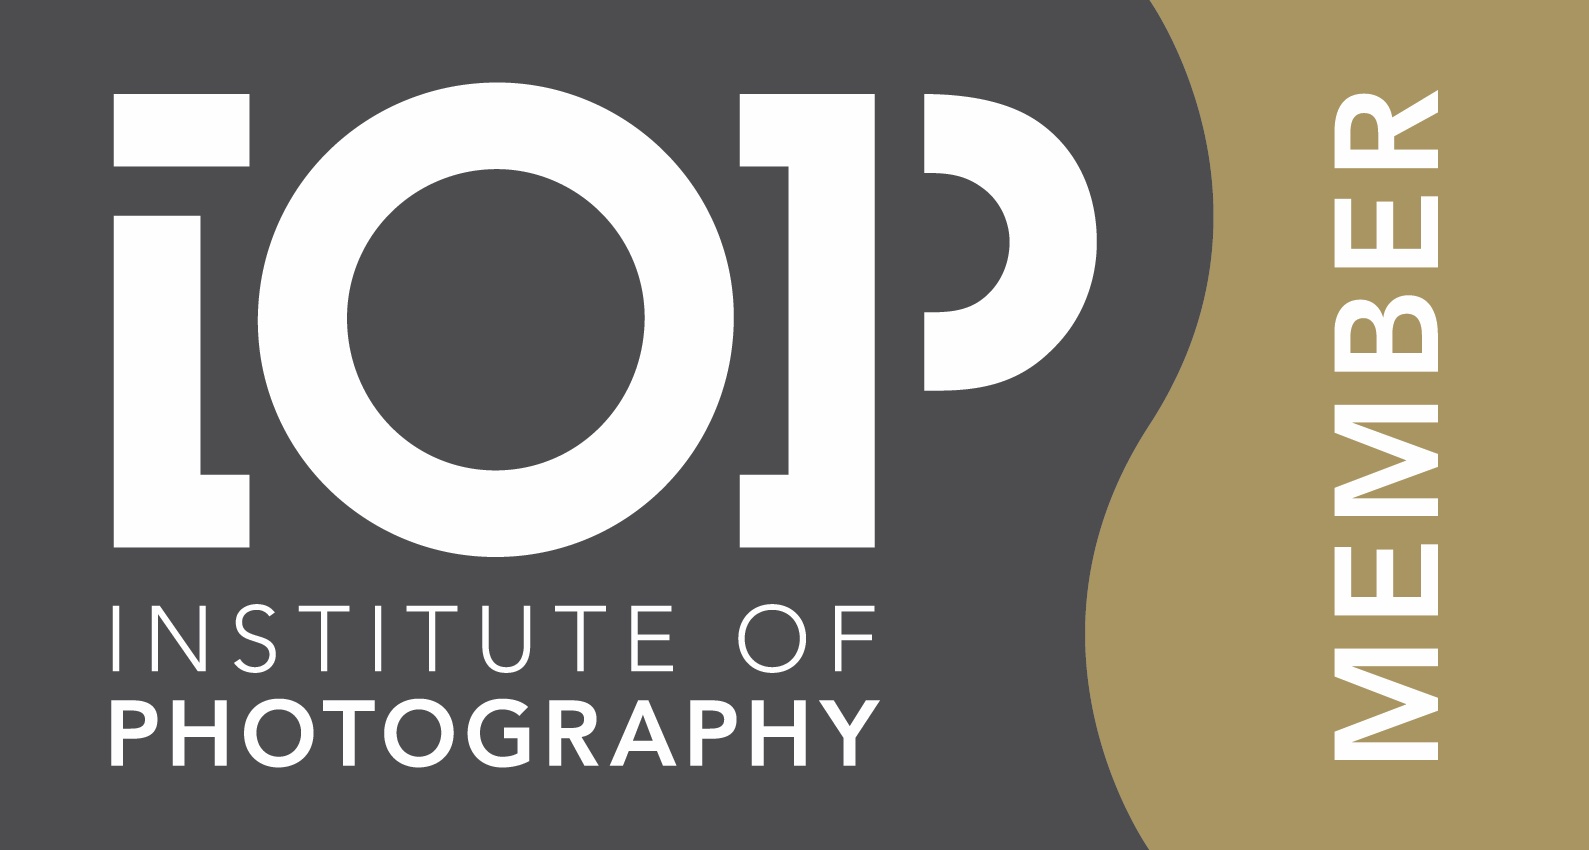 I have IOP membership having completed their Professional Diploma in Photography.